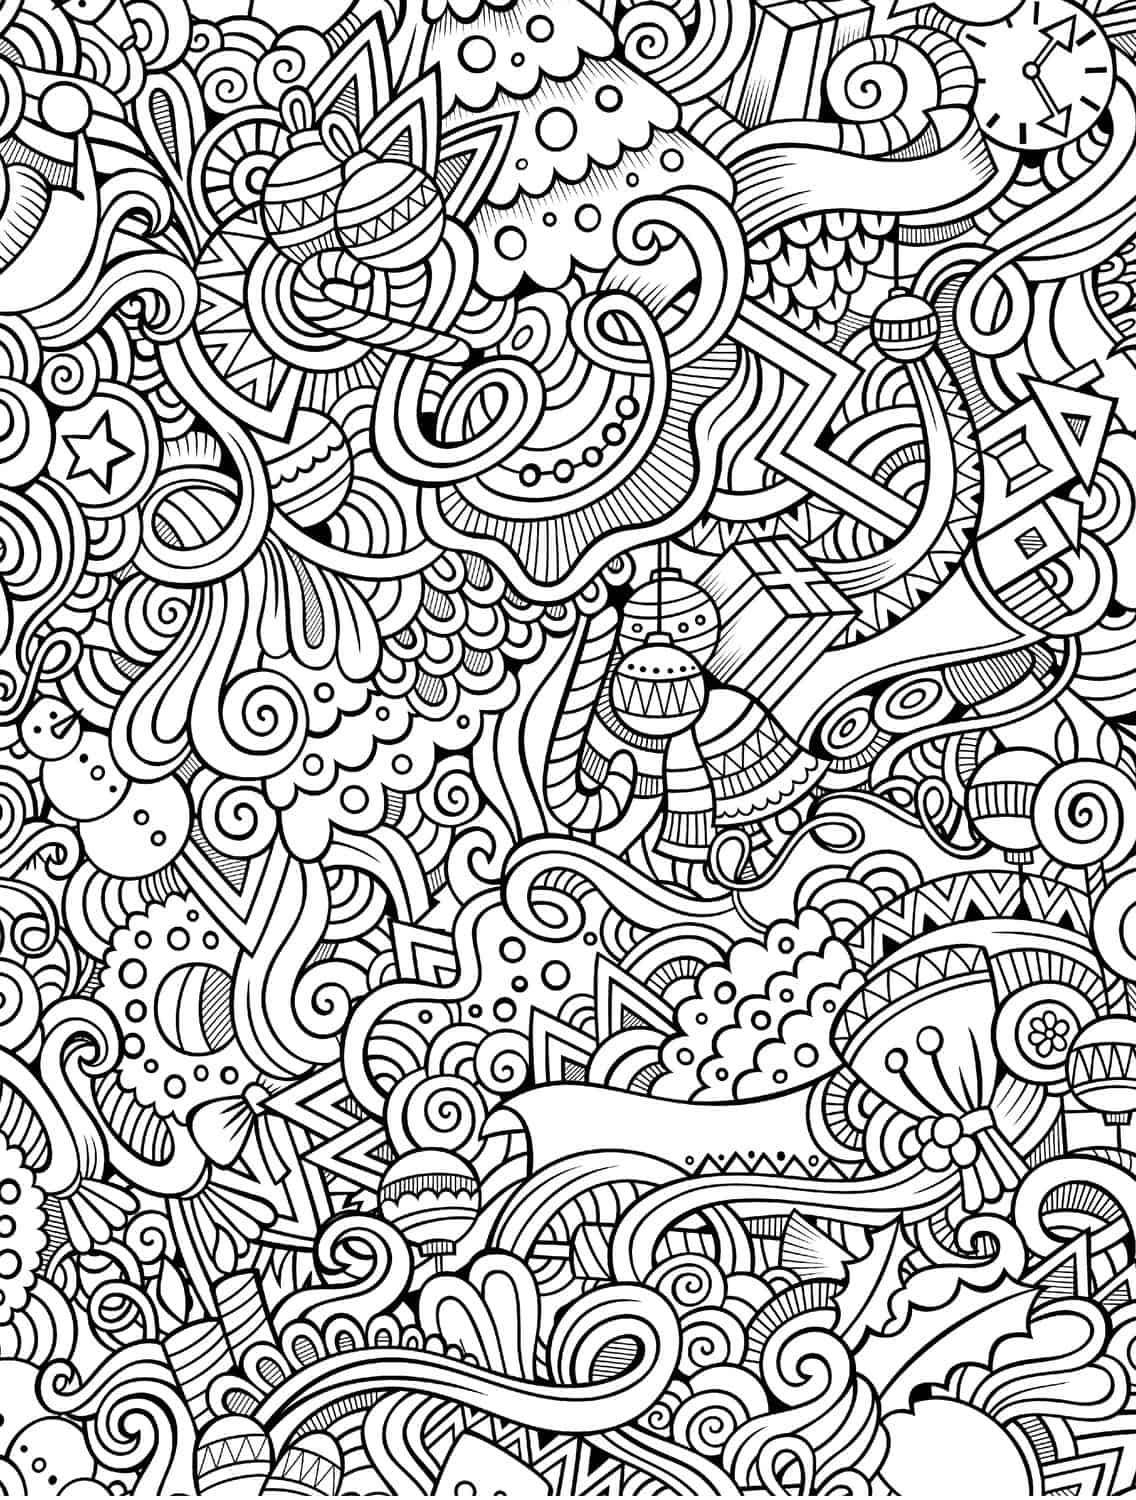 Adult Holiday Coloring Pages
 10 Free Printable Holiday Adult Coloring Pages